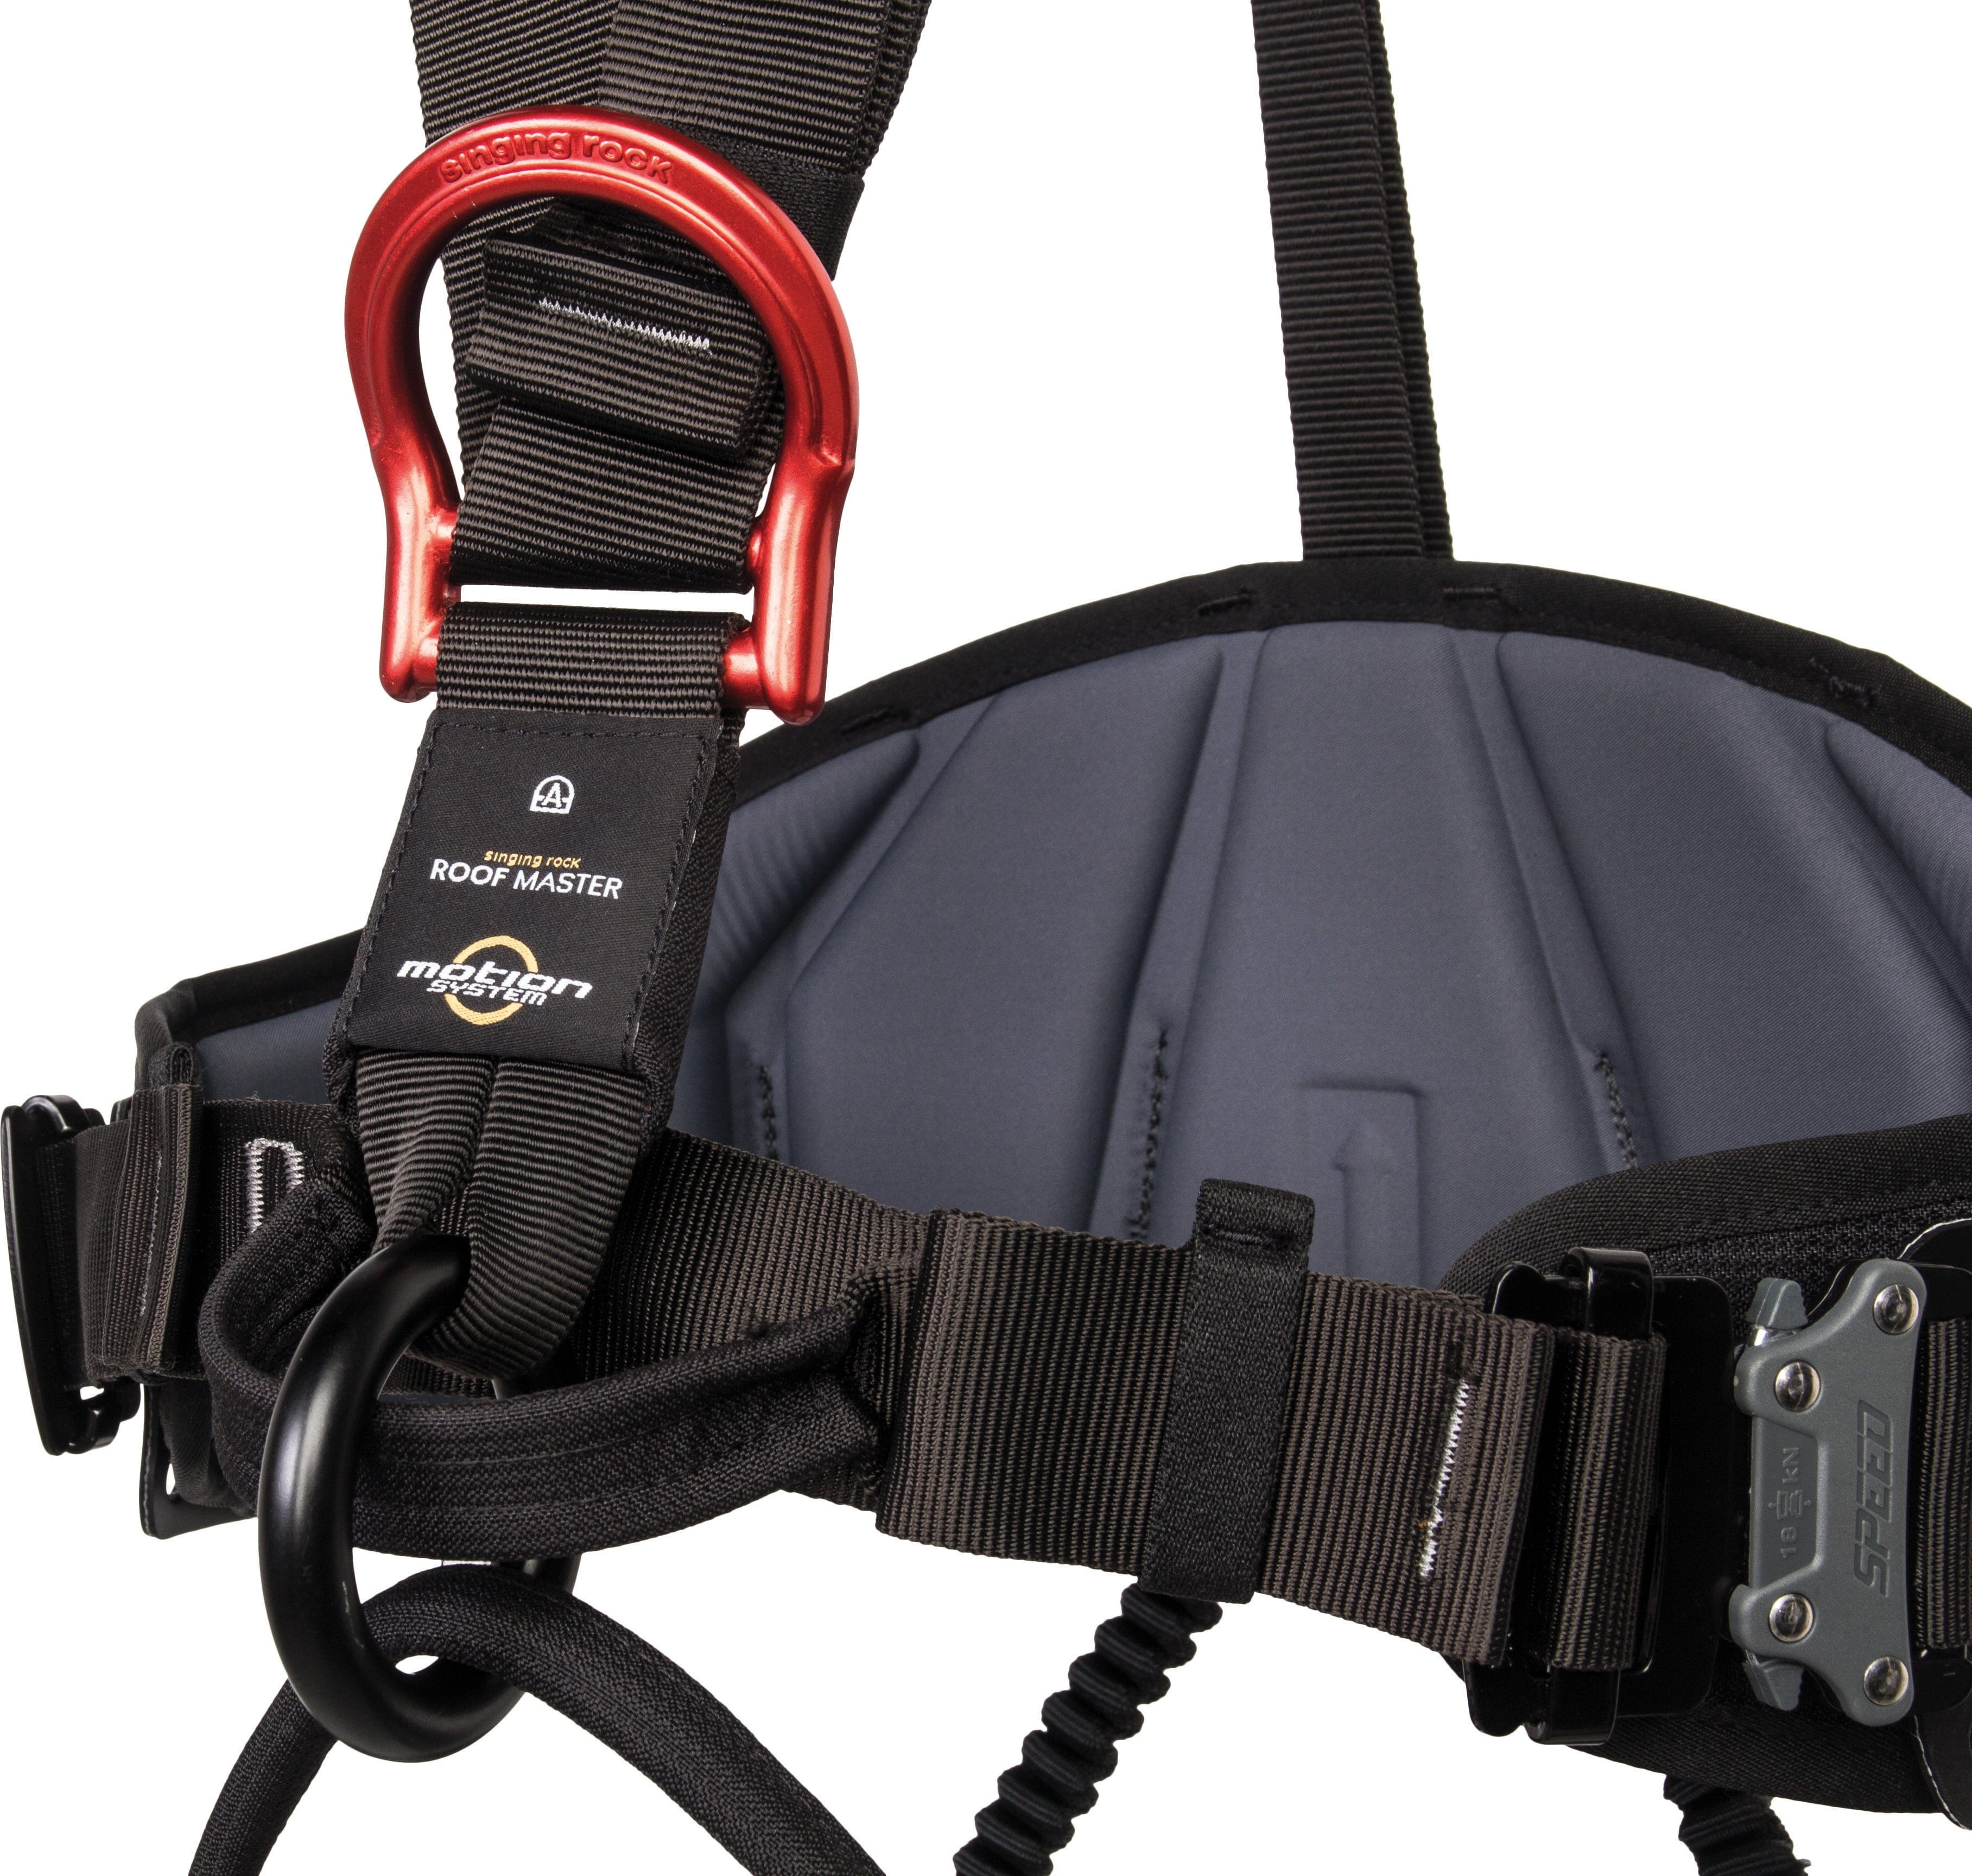 Detailed View of Roof Climbing Harness